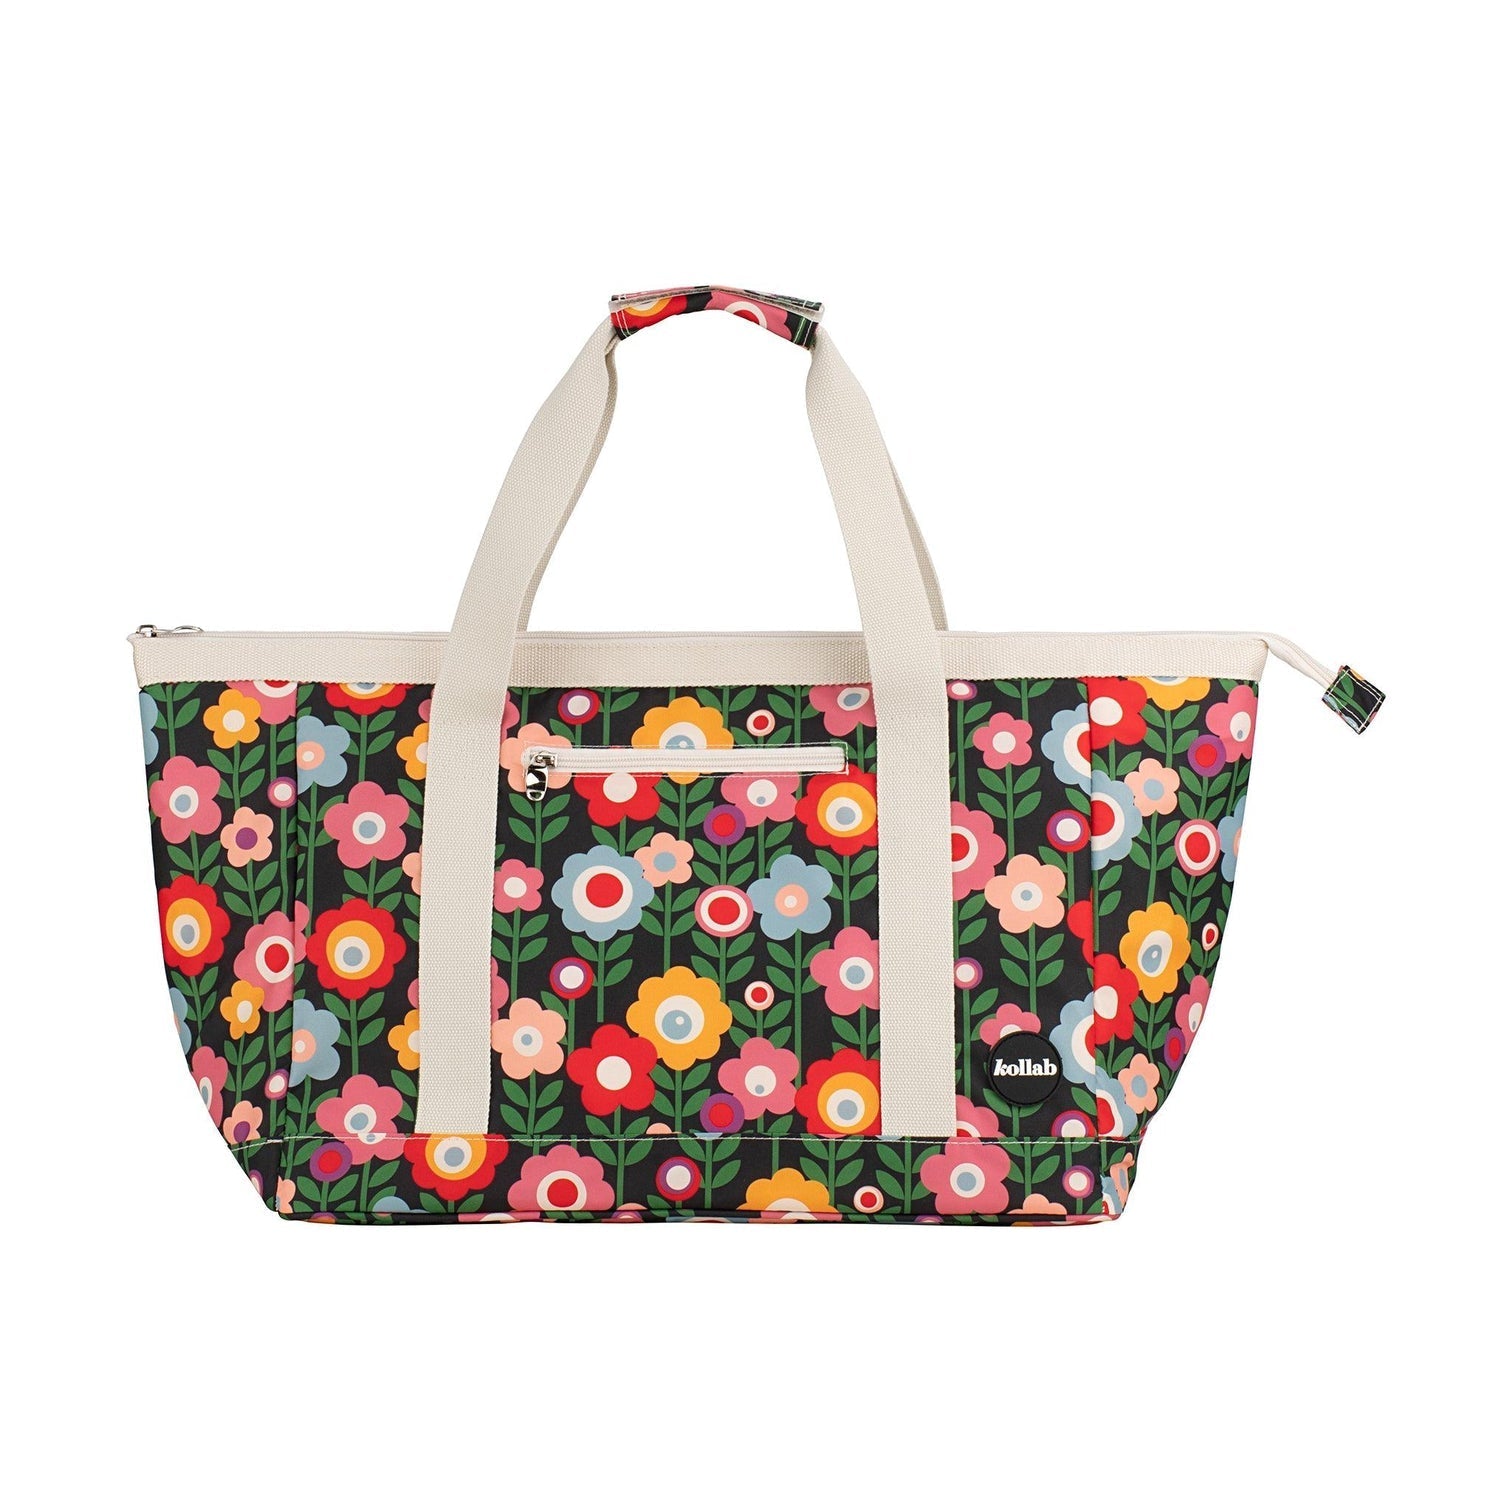 Tote Bag Marguerite-Travel & Outdoors-Kollab-The Bay Room